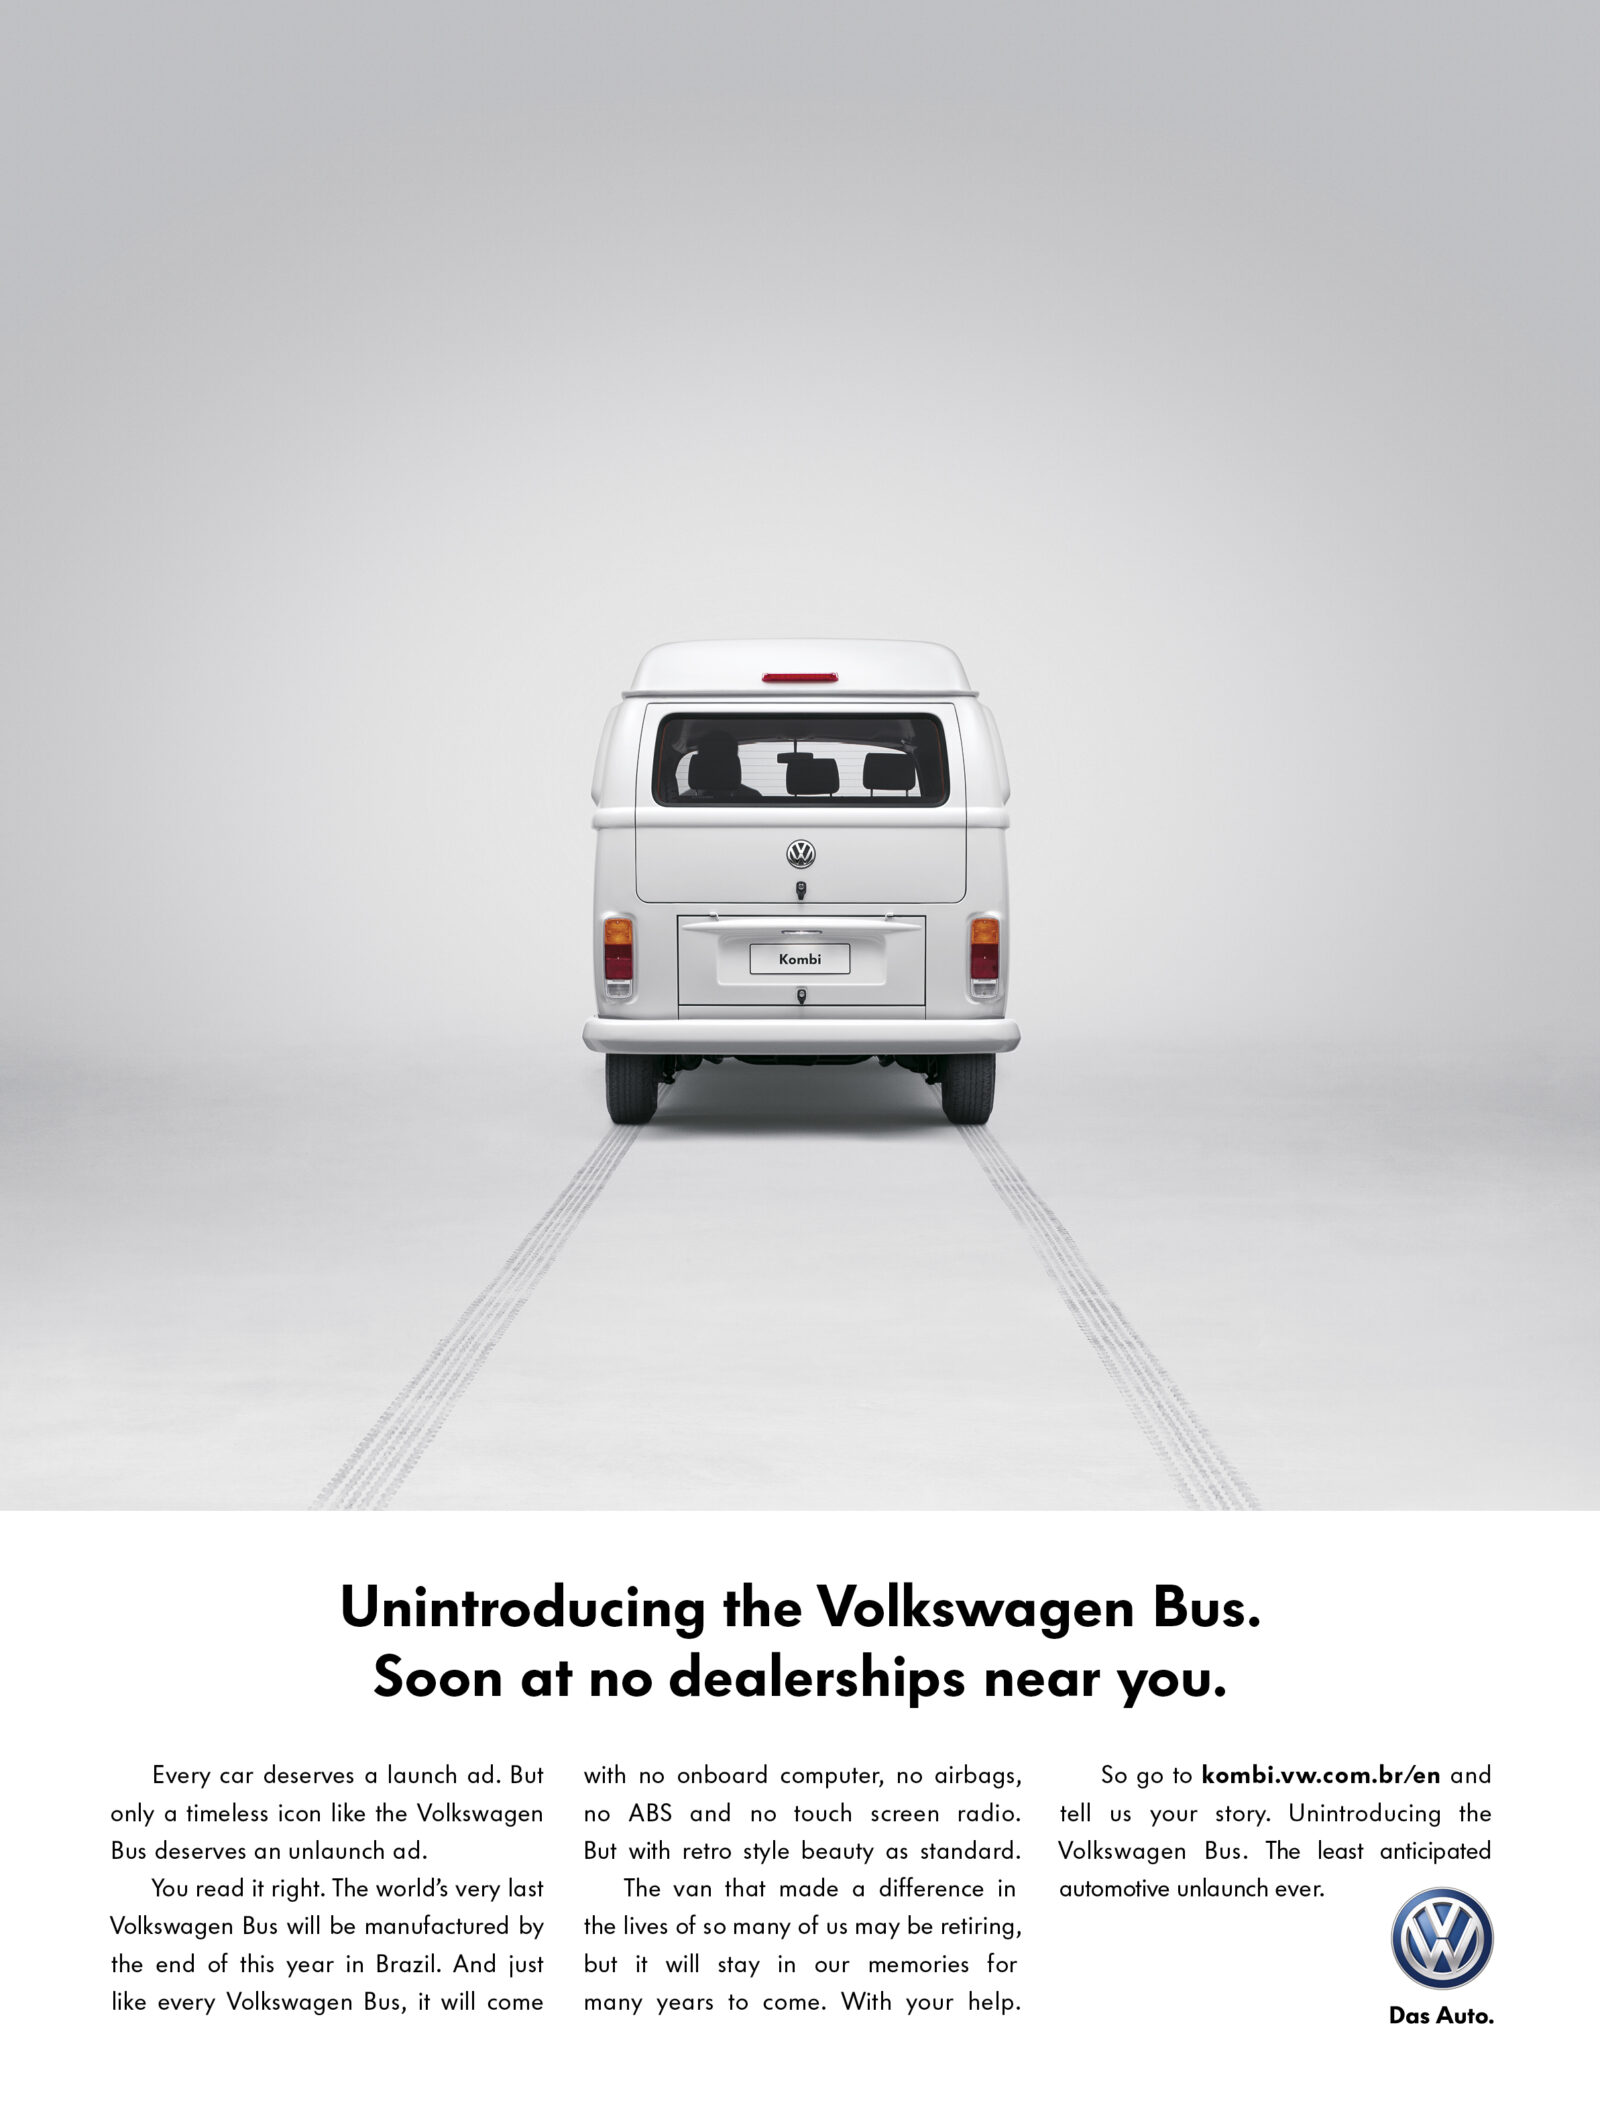 Print ad from VW unintroducing the Kombi